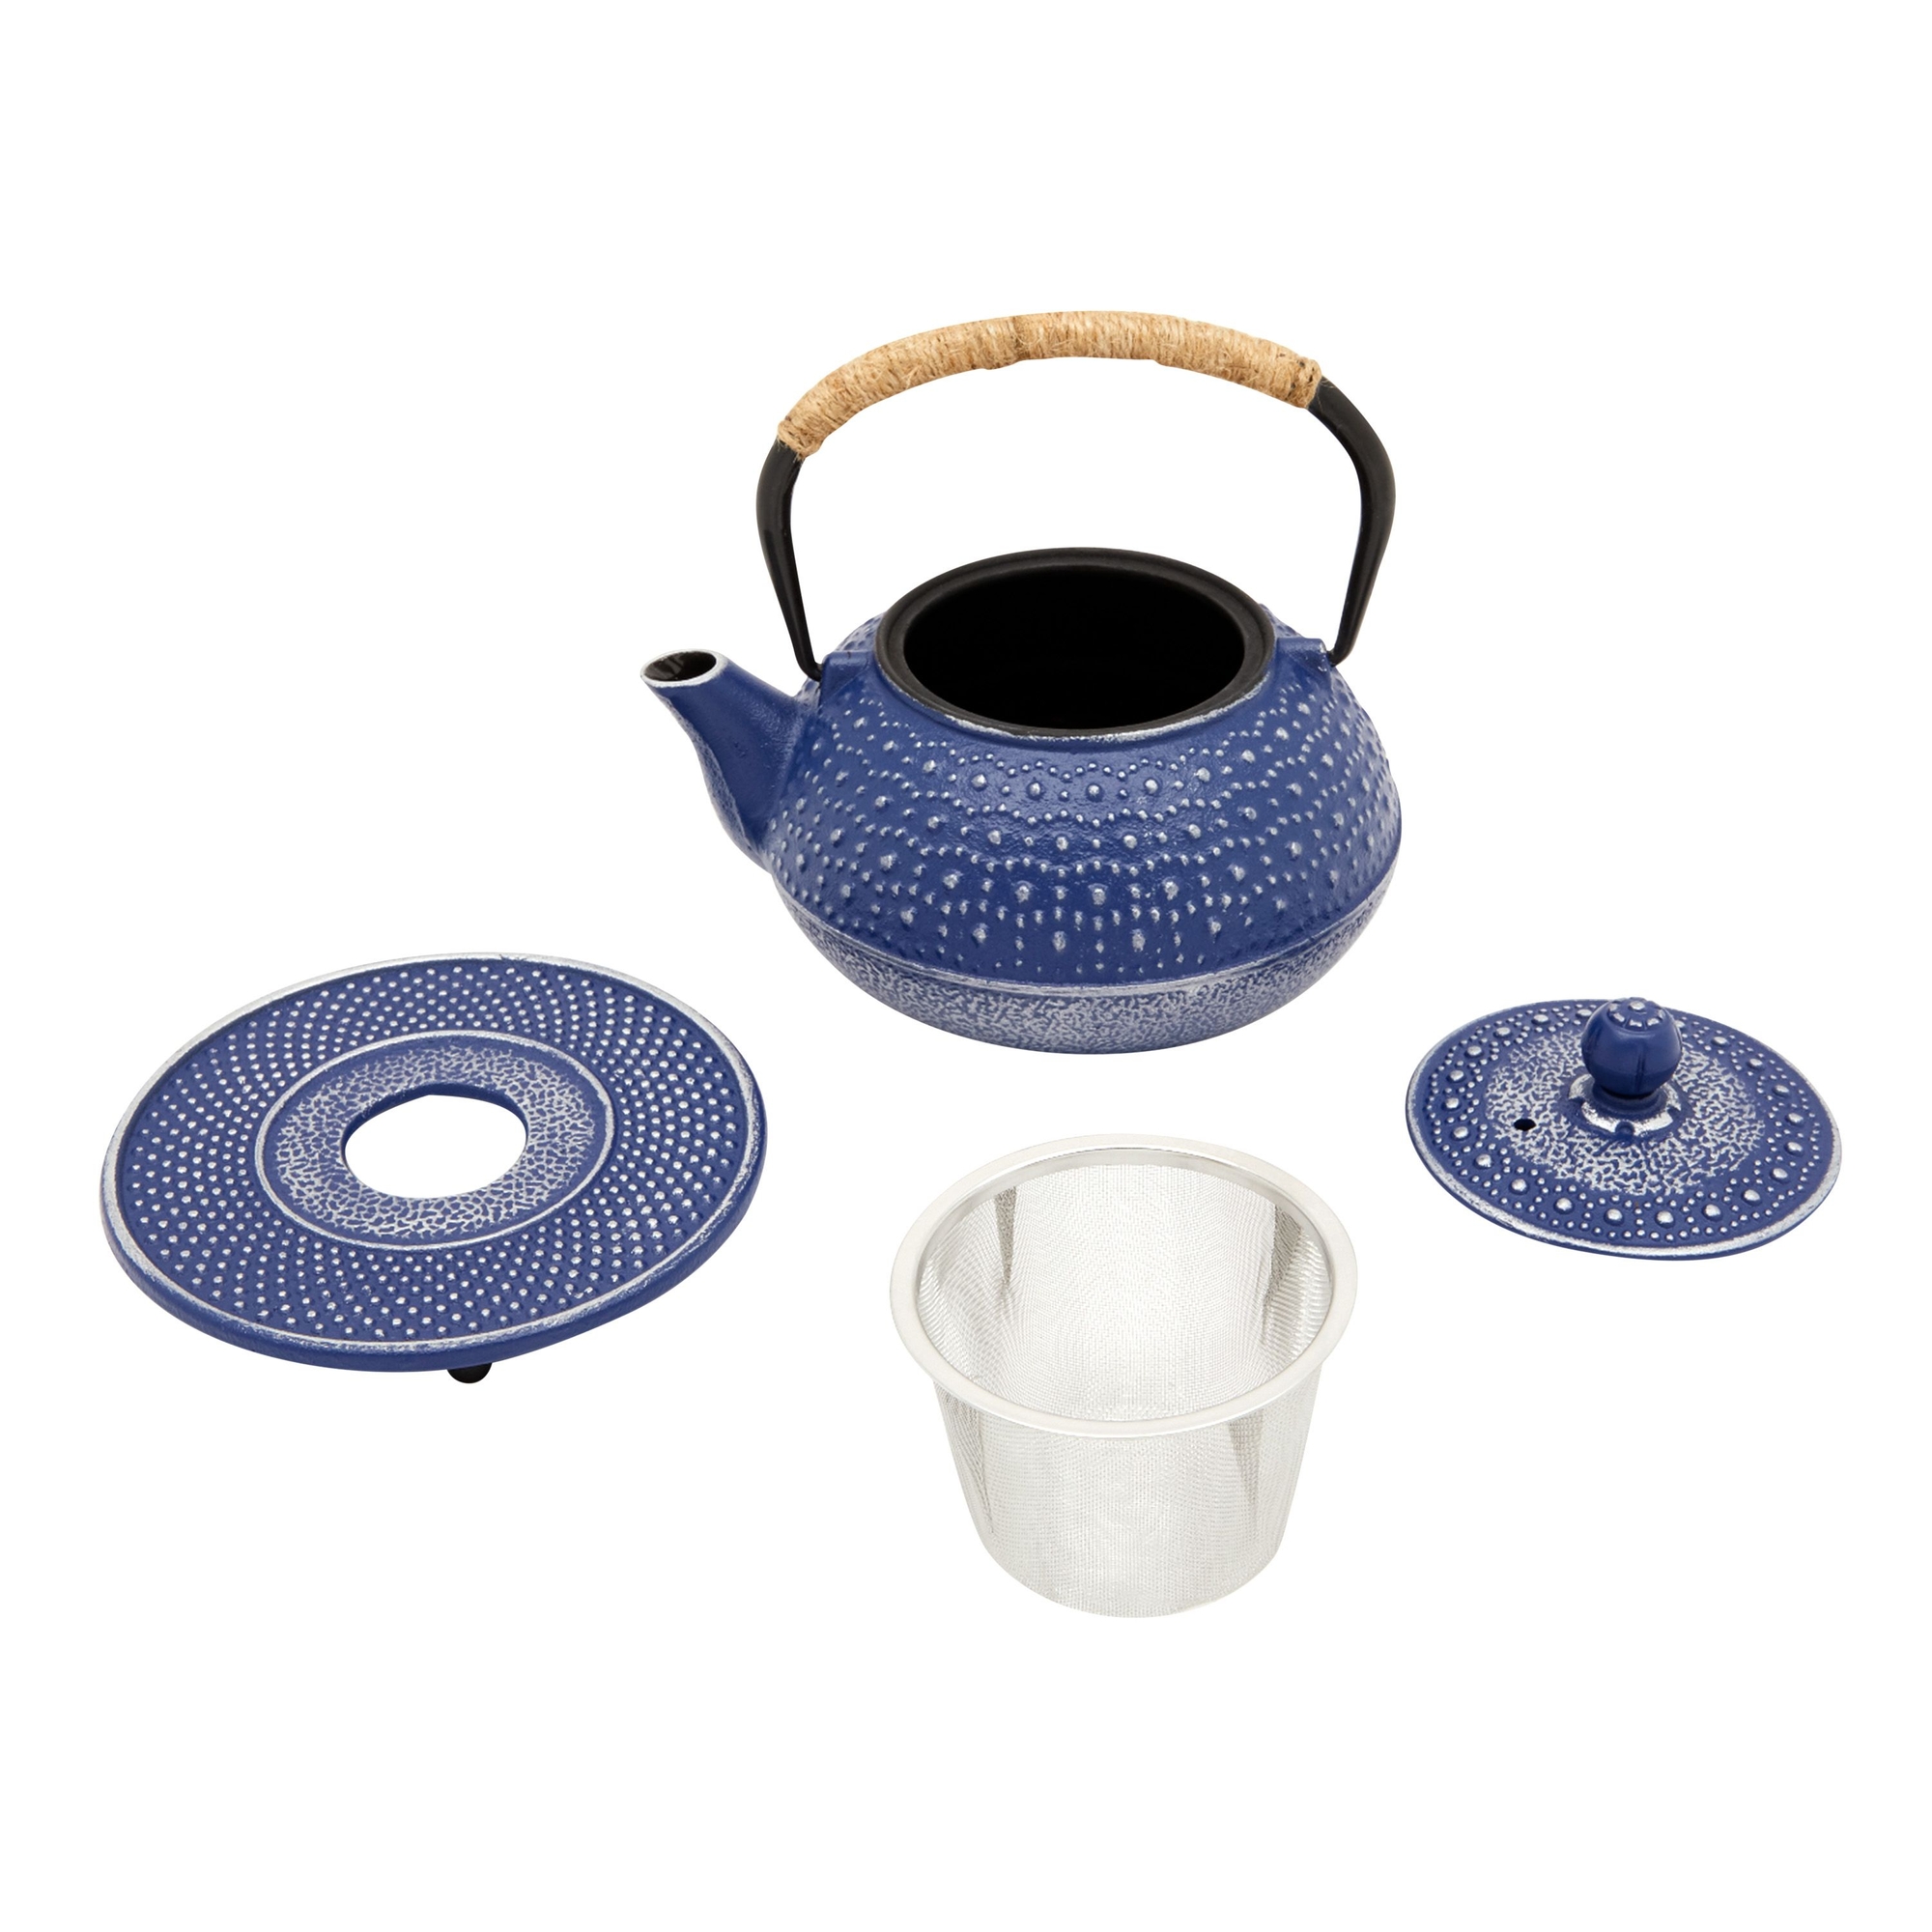 Cast Iron Teapot with Infuser - Japanese Tea Kettle, Loose Leaf Tetsubin with Handle and Trivet (Blue, 3 Pcs, holds 27 oz, 800 ml) - image 5 of 10